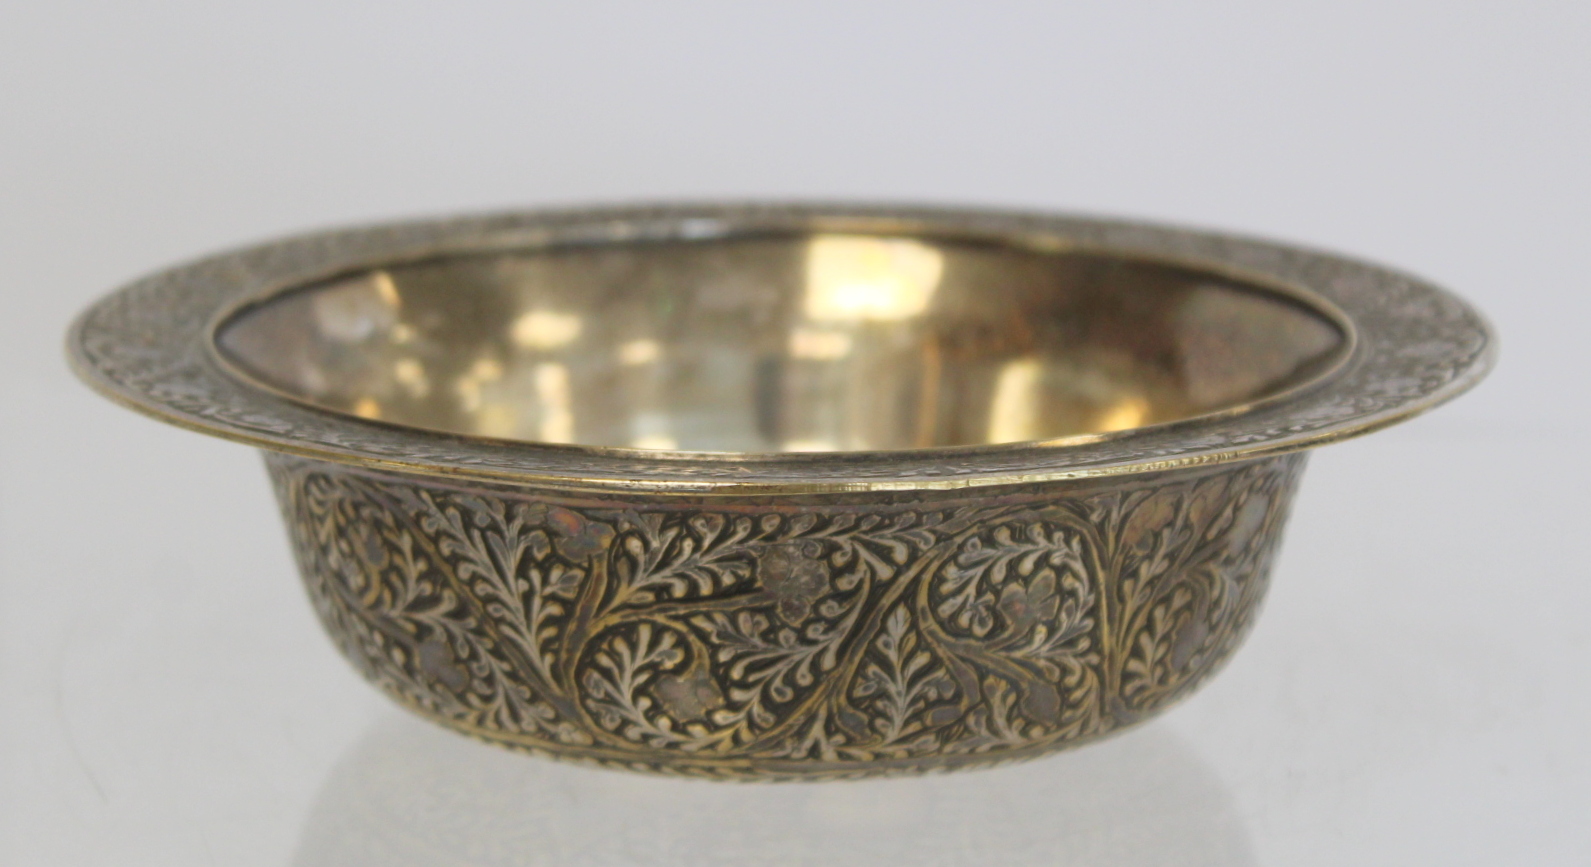 Oriental silvered circular brass bowl with engraved floral and foliate decoration, 16cm diam.